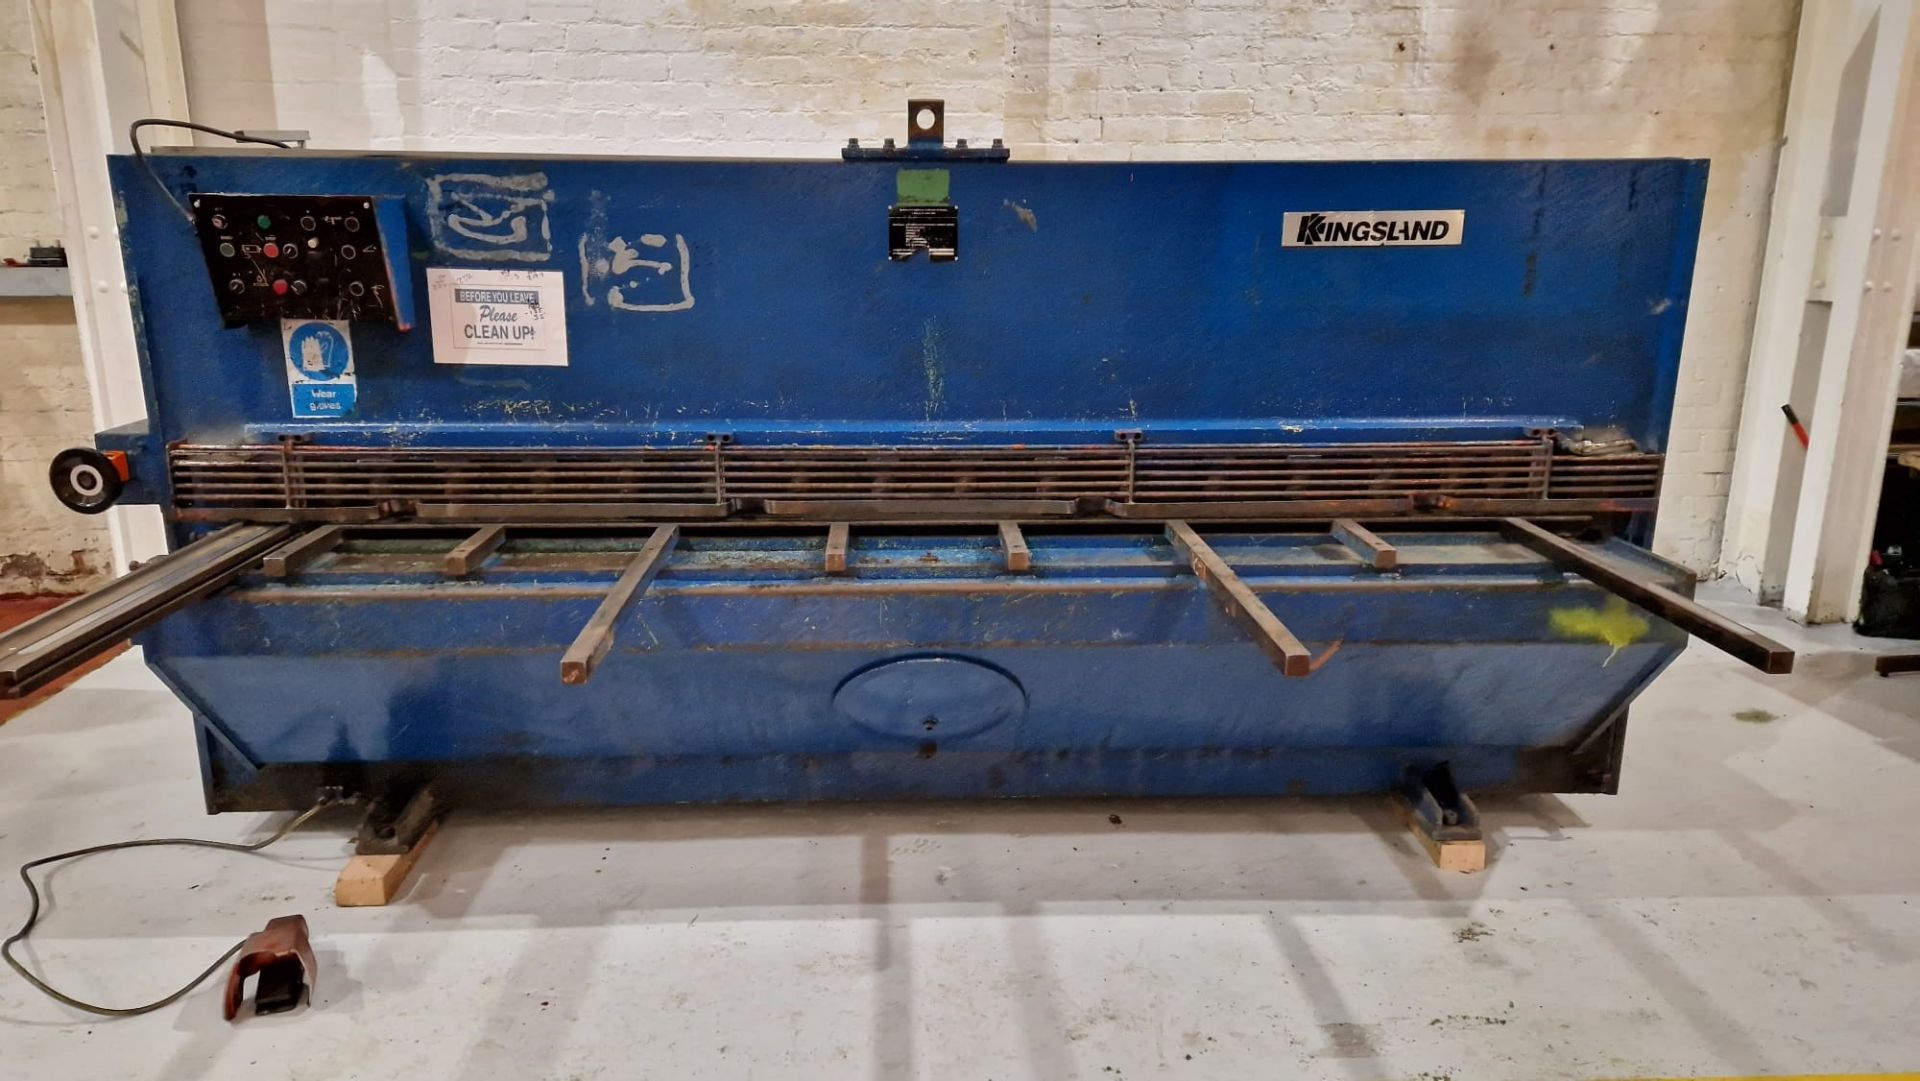 Kingsland 3000 x 6mm Hydraulic Guillotine - Image 3 of 5